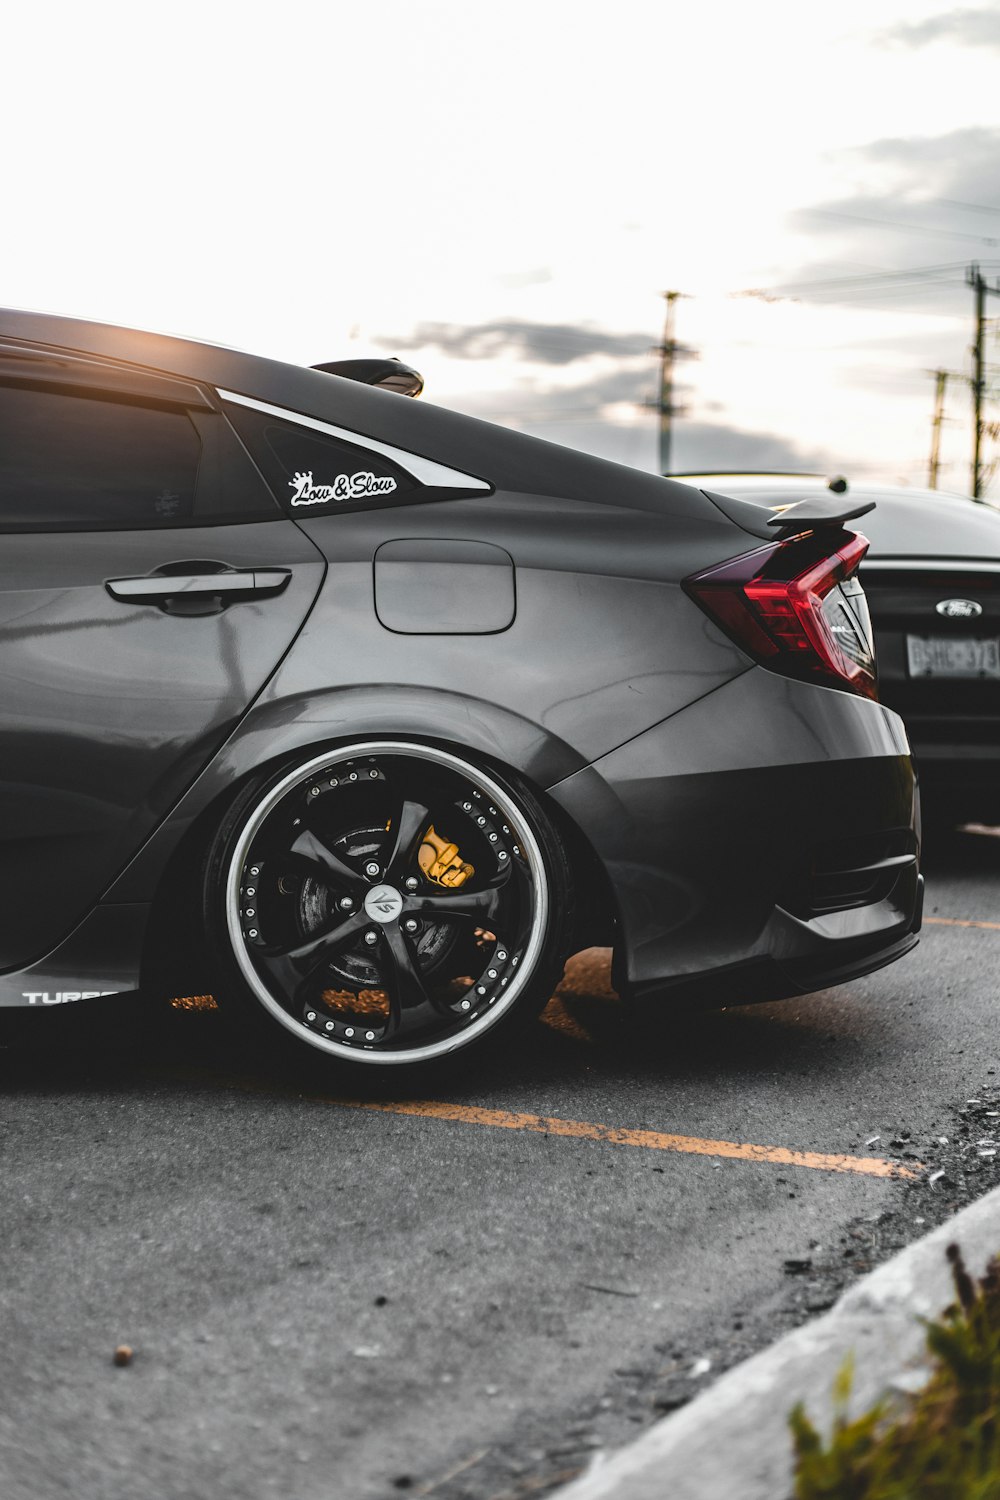 500 Honda Civic Pictures Hd Download Free Images On Unsplash